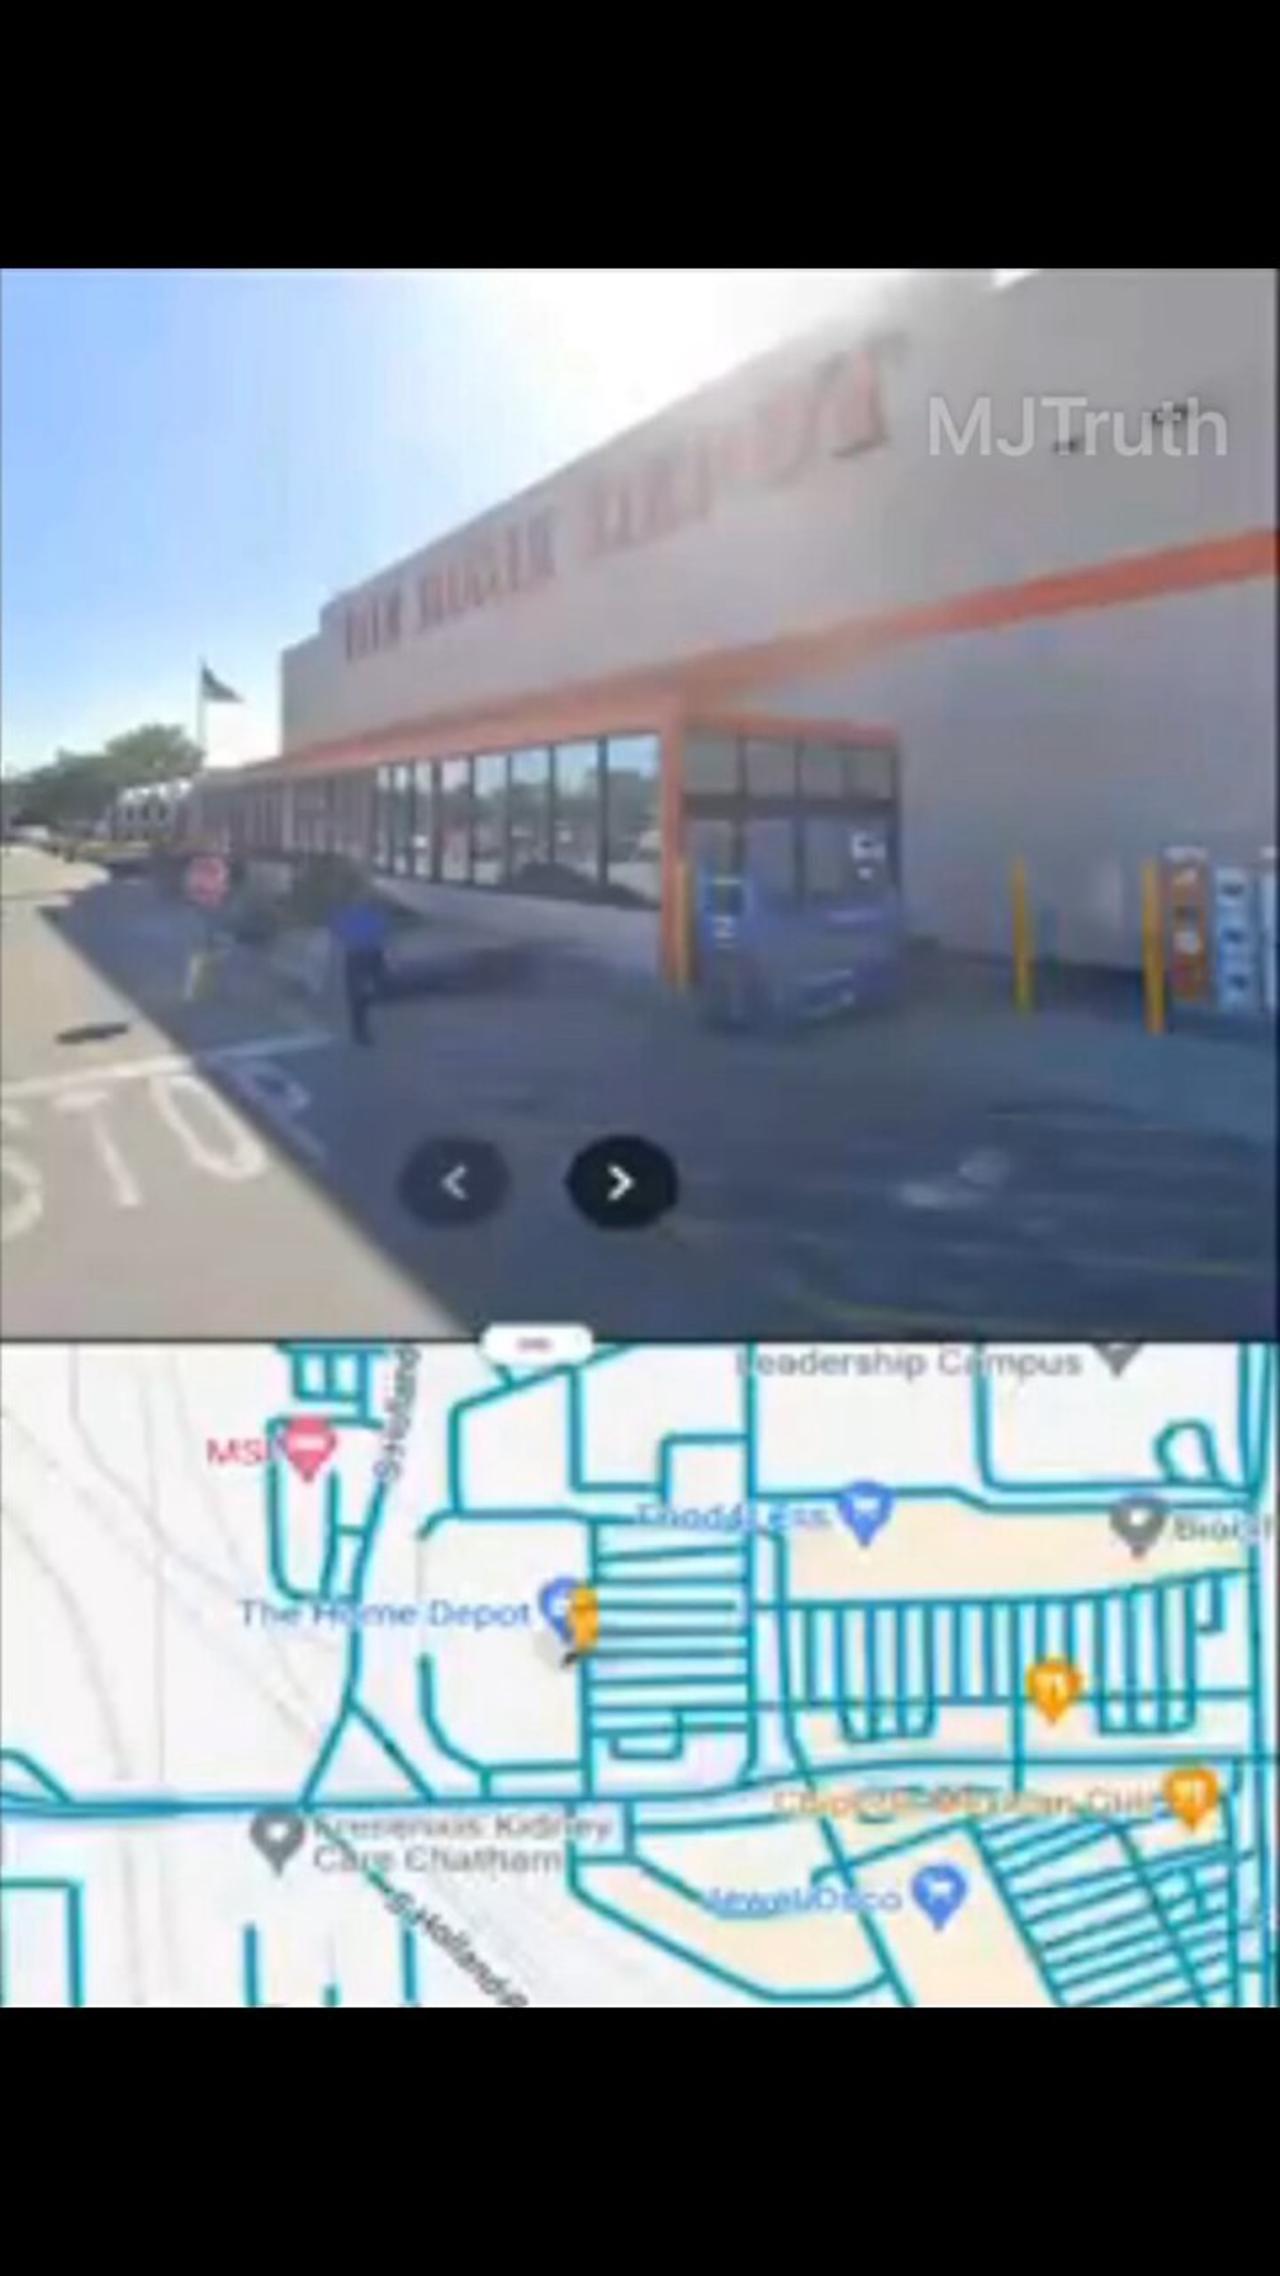 Over 100 illegal migrants attack two security guards in a Home Depot in Chicago